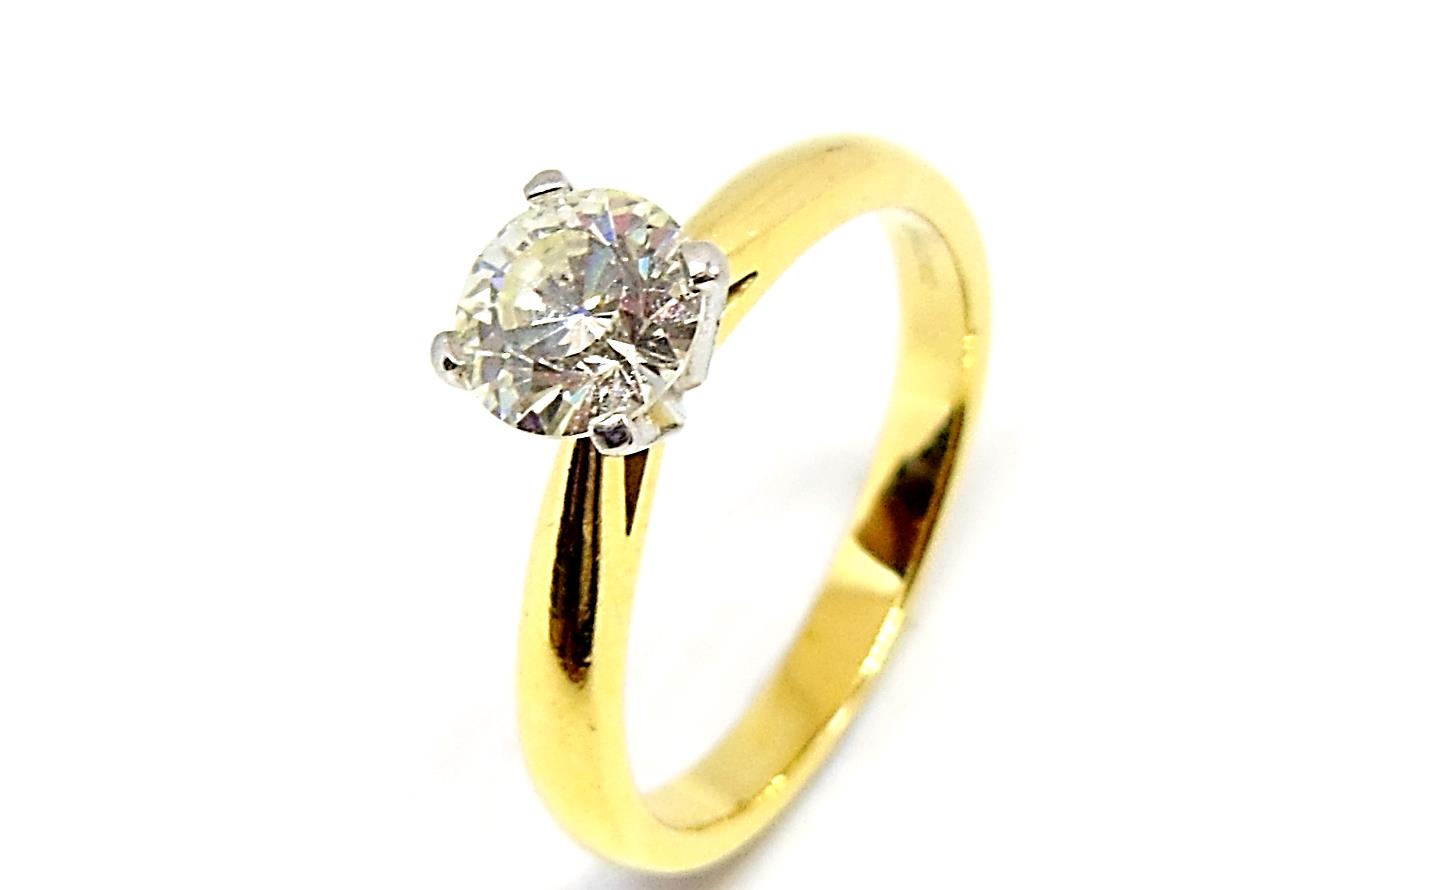 18ct Yellow Gold Solitaire Diamond Ring | Hoppers Jewellers